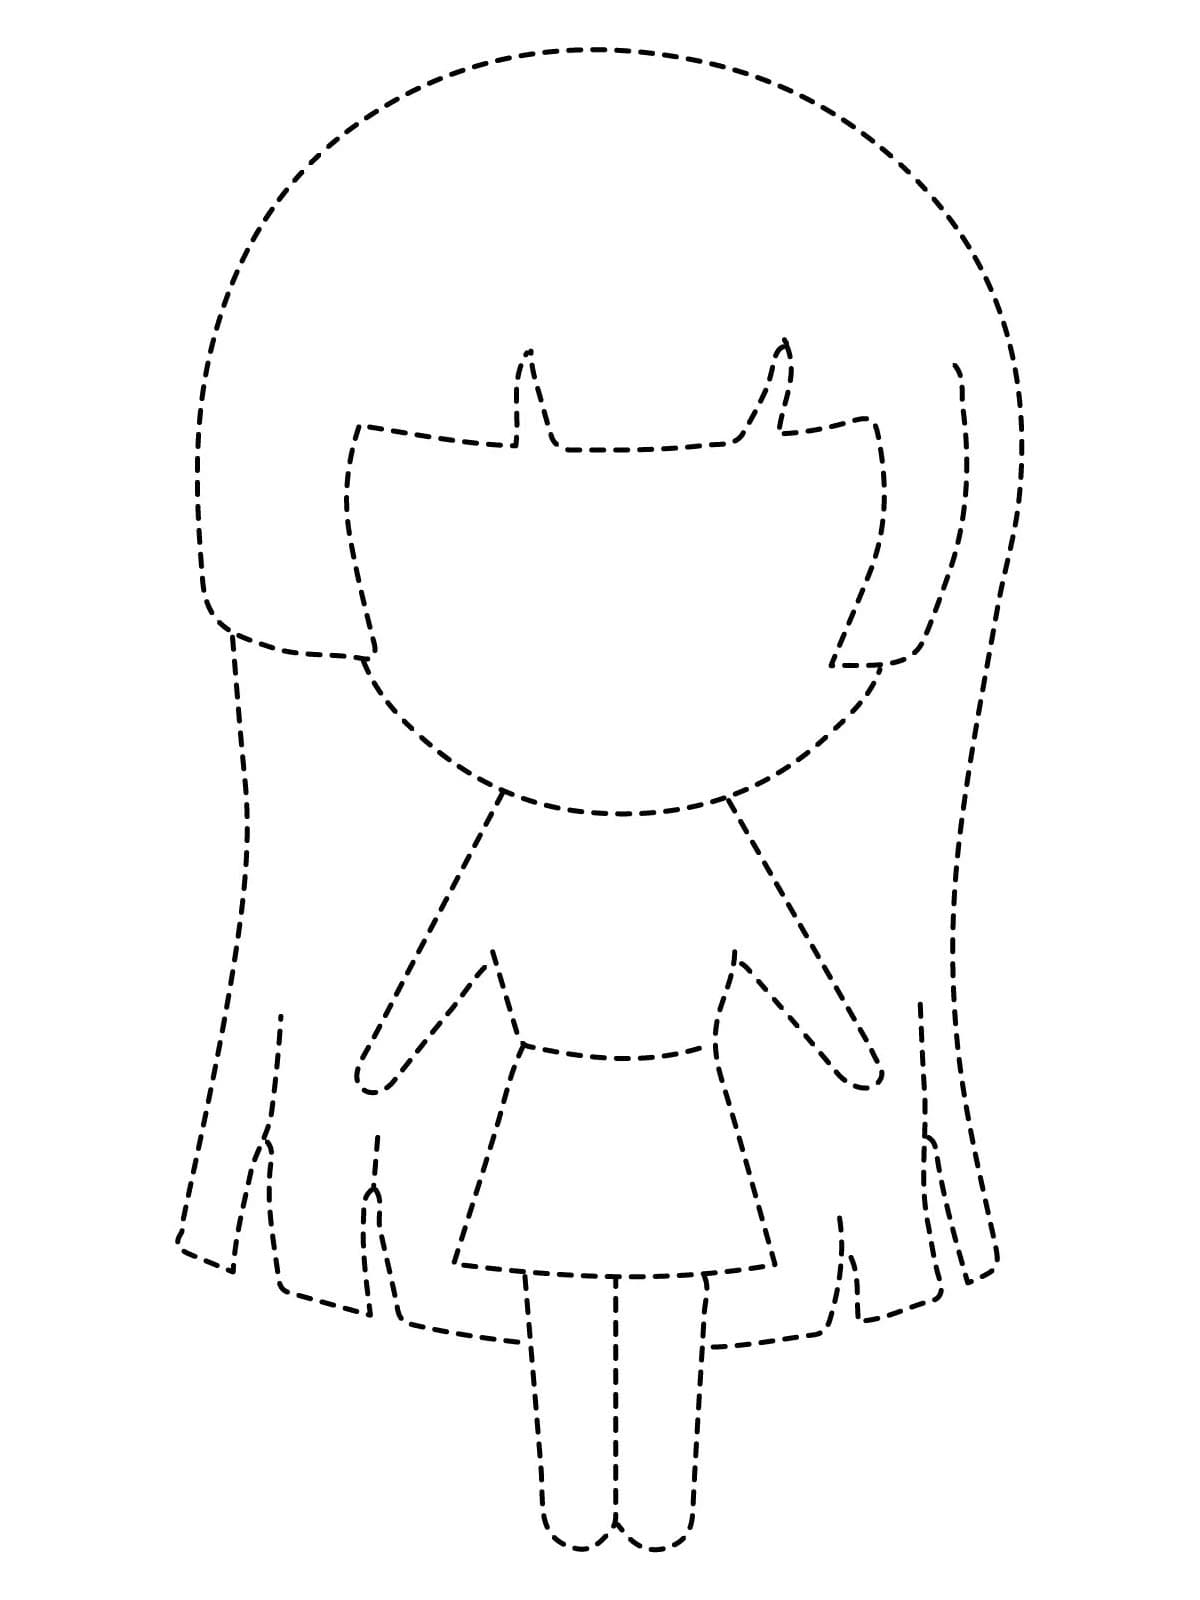 Basic Girl Tracing Worksheet coloring page - Download, Print or Color ...